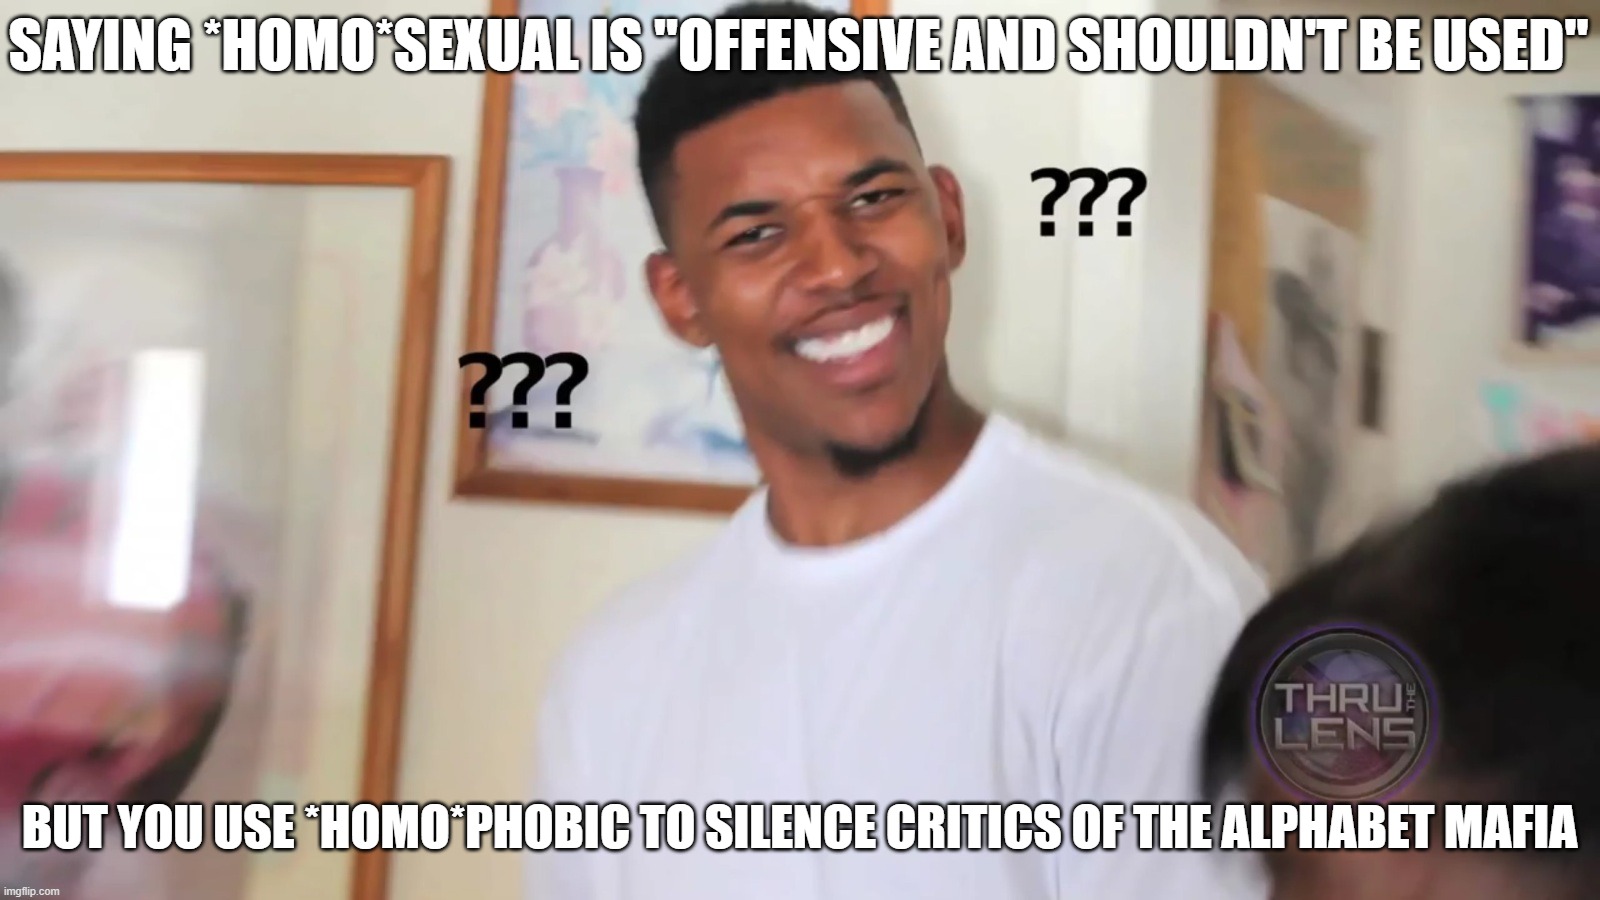 black guy question mark | SAYING *HOMO*SEXUAL IS "OFFENSIVE AND SHOULDN'T BE USED"; BUT YOU USE *HOMO*PHOBIC TO SILENCE CRITICS OF THE ALPHABET MAFIA | image tagged in black guy question mark,lgbtq,lgbt,homophobic,hypocrisy,confused black guy | made w/ Imgflip meme maker